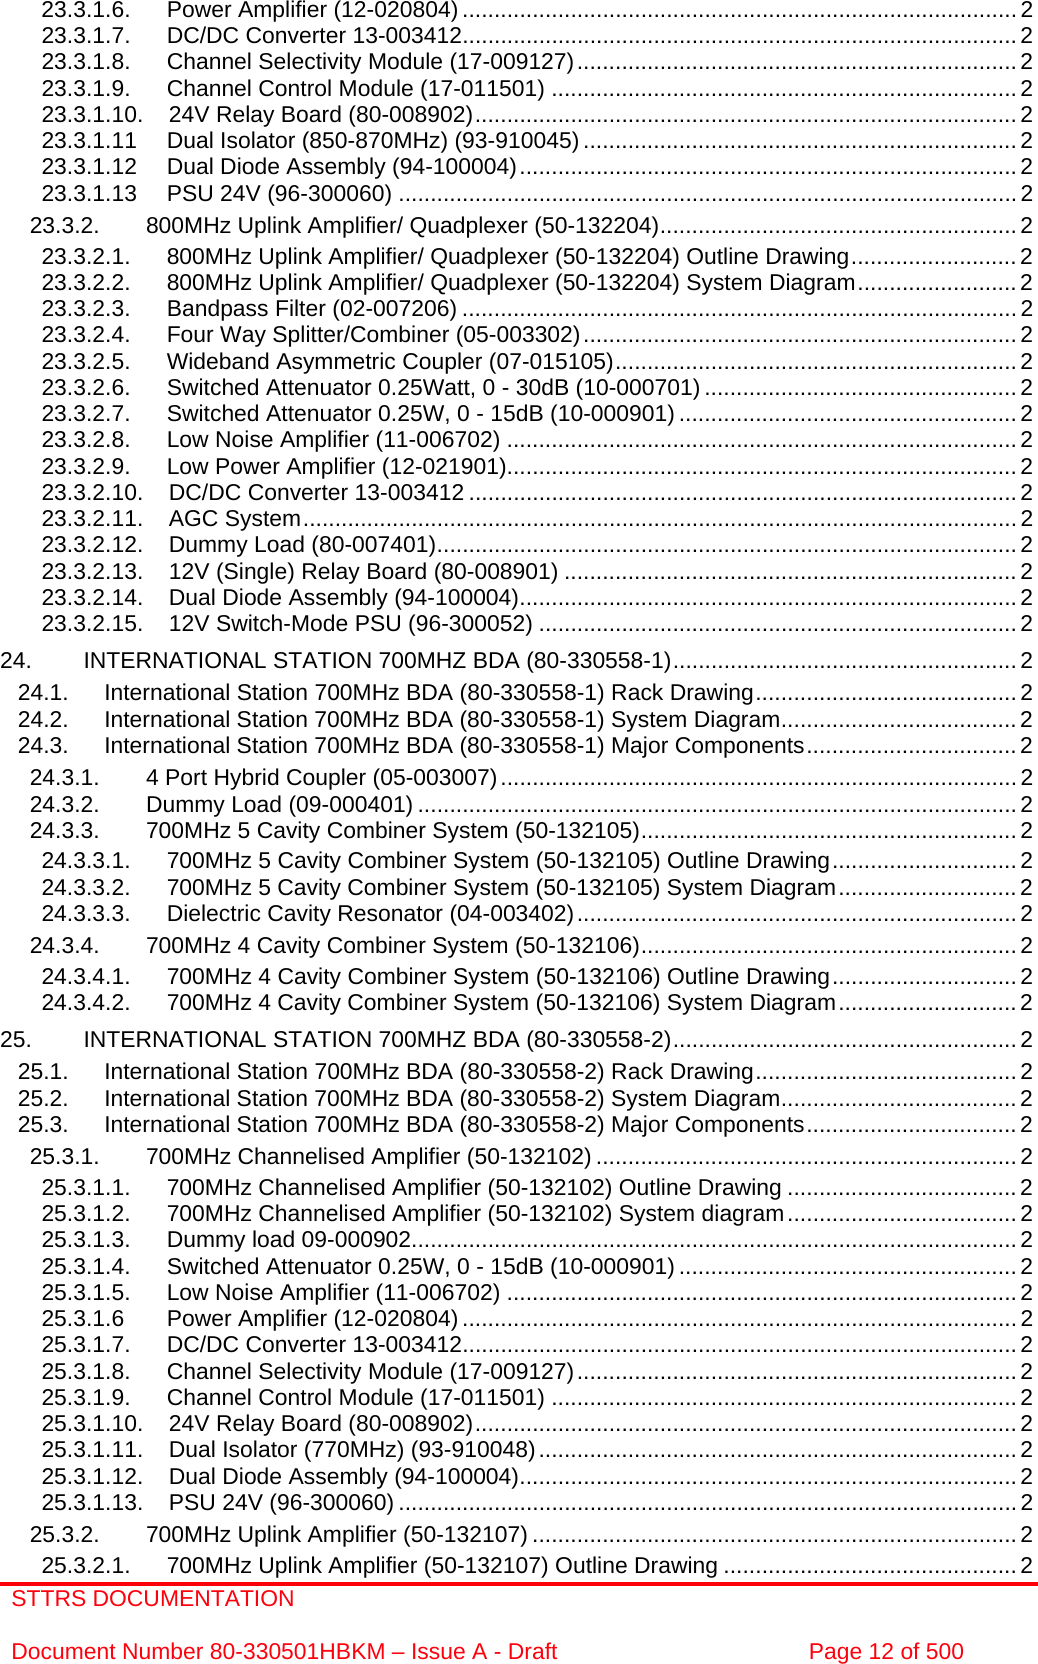 STTRS DOCUMENTATION  Document Number 80-330501HBKM – Issue A - Draft  Page 12 of 500  23.3.1.6. Power Amplifier (12-020804) ....................................................................................... 2 23.3.1.7. DC/DC Converter 13-003412....................................................................................... 2 23.3.1.8. Channel Selectivity Module (17-009127).....................................................................2 23.3.1.9. Channel Control Module (17-011501) .........................................................................2 23.3.1.10. 24V Relay Board (80-008902).....................................................................................2 23.3.1.11 Dual Isolator (850-870MHz) (93-910045) .................................................................... 2 23.3.1.12 Dual Diode Assembly (94-100004)..............................................................................2 23.3.1.13 PSU 24V (96-300060) .................................................................................................2 23.3.2. 800MHz Uplink Amplifier/ Quadplexer (50-132204)........................................................ 2 23.3.2.1. 800MHz Uplink Amplifier/ Quadplexer (50-132204) Outline Drawing..........................2 23.3.2.2. 800MHz Uplink Amplifier/ Quadplexer (50-132204) System Diagram.........................2 23.3.2.3. Bandpass Filter (02-007206) ....................................................................................... 2 23.3.2.4. Four Way Splitter/Combiner (05-003302)....................................................................2 23.3.2.5. Wideband Asymmetric Coupler (07-015105)............................................................... 2 23.3.2.6. Switched Attenuator 0.25Watt, 0 - 30dB (10-000701) ................................................. 2 23.3.2.7. Switched Attenuator 0.25W, 0 - 15dB (10-000901) ..................................................... 2 23.3.2.8. Low Noise Amplifier (11-006702) ................................................................................2 23.3.2.9. Low Power Amplifier (12-021901)................................................................................2 23.3.2.10. DC/DC Converter 13-003412 ...................................................................................... 2 23.3.2.11. AGC System................................................................................................................2 23.3.2.12. Dummy Load (80-007401)........................................................................................... 2 23.3.2.13. 12V (Single) Relay Board (80-008901) ....................................................................... 2 23.3.2.14. Dual Diode Assembly (94-100004).............................................................................. 2 23.3.2.15. 12V Switch-Mode PSU (96-300052) ........................................................................... 2 24. INTERNATIONAL STATION 700MHZ BDA (80-330558-1)...................................................... 2 24.1. International Station 700MHz BDA (80-330558-1) Rack Drawing.........................................2 24.2. International Station 700MHz BDA (80-330558-1) System Diagram..................................... 2 24.3. International Station 700MHz BDA (80-330558-1) Major Components.................................2 24.3.1. 4 Port Hybrid Coupler (05-003007)................................................................................. 2 24.3.2. Dummy Load (09-000401) ..............................................................................................2 24.3.3. 700MHz 5 Cavity Combiner System (50-132105)...........................................................2 24.3.3.1. 700MHz 5 Cavity Combiner System (50-132105) Outline Drawing............................. 2 24.3.3.2. 700MHz 5 Cavity Combiner System (50-132105) System Diagram............................ 2 24.3.3.3. Dielectric Cavity Resonator (04-003402).....................................................................2 24.3.4. 700MHz 4 Cavity Combiner System (50-132106)...........................................................2 24.3.4.1. 700MHz 4 Cavity Combiner System (50-132106) Outline Drawing............................. 2 24.3.4.2. 700MHz 4 Cavity Combiner System (50-132106) System Diagram............................ 2 25. INTERNATIONAL STATION 700MHZ BDA (80-330558-2)...................................................... 2 25.1. International Station 700MHz BDA (80-330558-2) Rack Drawing.........................................2 25.2. International Station 700MHz BDA (80-330558-2) System Diagram..................................... 2 25.3. International Station 700MHz BDA (80-330558-2) Major Components.................................2 25.3.1. 700MHz Channelised Amplifier (50-132102) ..................................................................2 25.3.1.1. 700MHz Channelised Amplifier (50-132102) Outline Drawing .................................... 2 25.3.1.2. 700MHz Channelised Amplifier (50-132102) System diagram....................................2 25.3.1.3. Dummy load 09-000902...............................................................................................2 25.3.1.4. Switched Attenuator 0.25W, 0 - 15dB (10-000901) ..................................................... 2 25.3.1.5. Low Noise Amplifier (11-006702) ................................................................................2 25.3.1.6 Power Amplifier (12-020804) ....................................................................................... 2 25.3.1.7. DC/DC Converter 13-003412....................................................................................... 2 25.3.1.8. Channel Selectivity Module (17-009127).....................................................................2 25.3.1.9. Channel Control Module (17-011501) .........................................................................2 25.3.1.10. 24V Relay Board (80-008902).....................................................................................2 25.3.1.11. Dual Isolator (770MHz) (93-910048)........................................................................... 2 25.3.1.12. Dual Diode Assembly (94-100004).............................................................................. 2 25.3.1.13. PSU 24V (96-300060) .................................................................................................2 25.3.2. 700MHz Uplink Amplifier (50-132107) ............................................................................2 25.3.2.1. 700MHz Uplink Amplifier (50-132107) Outline Drawing .............................................. 2 